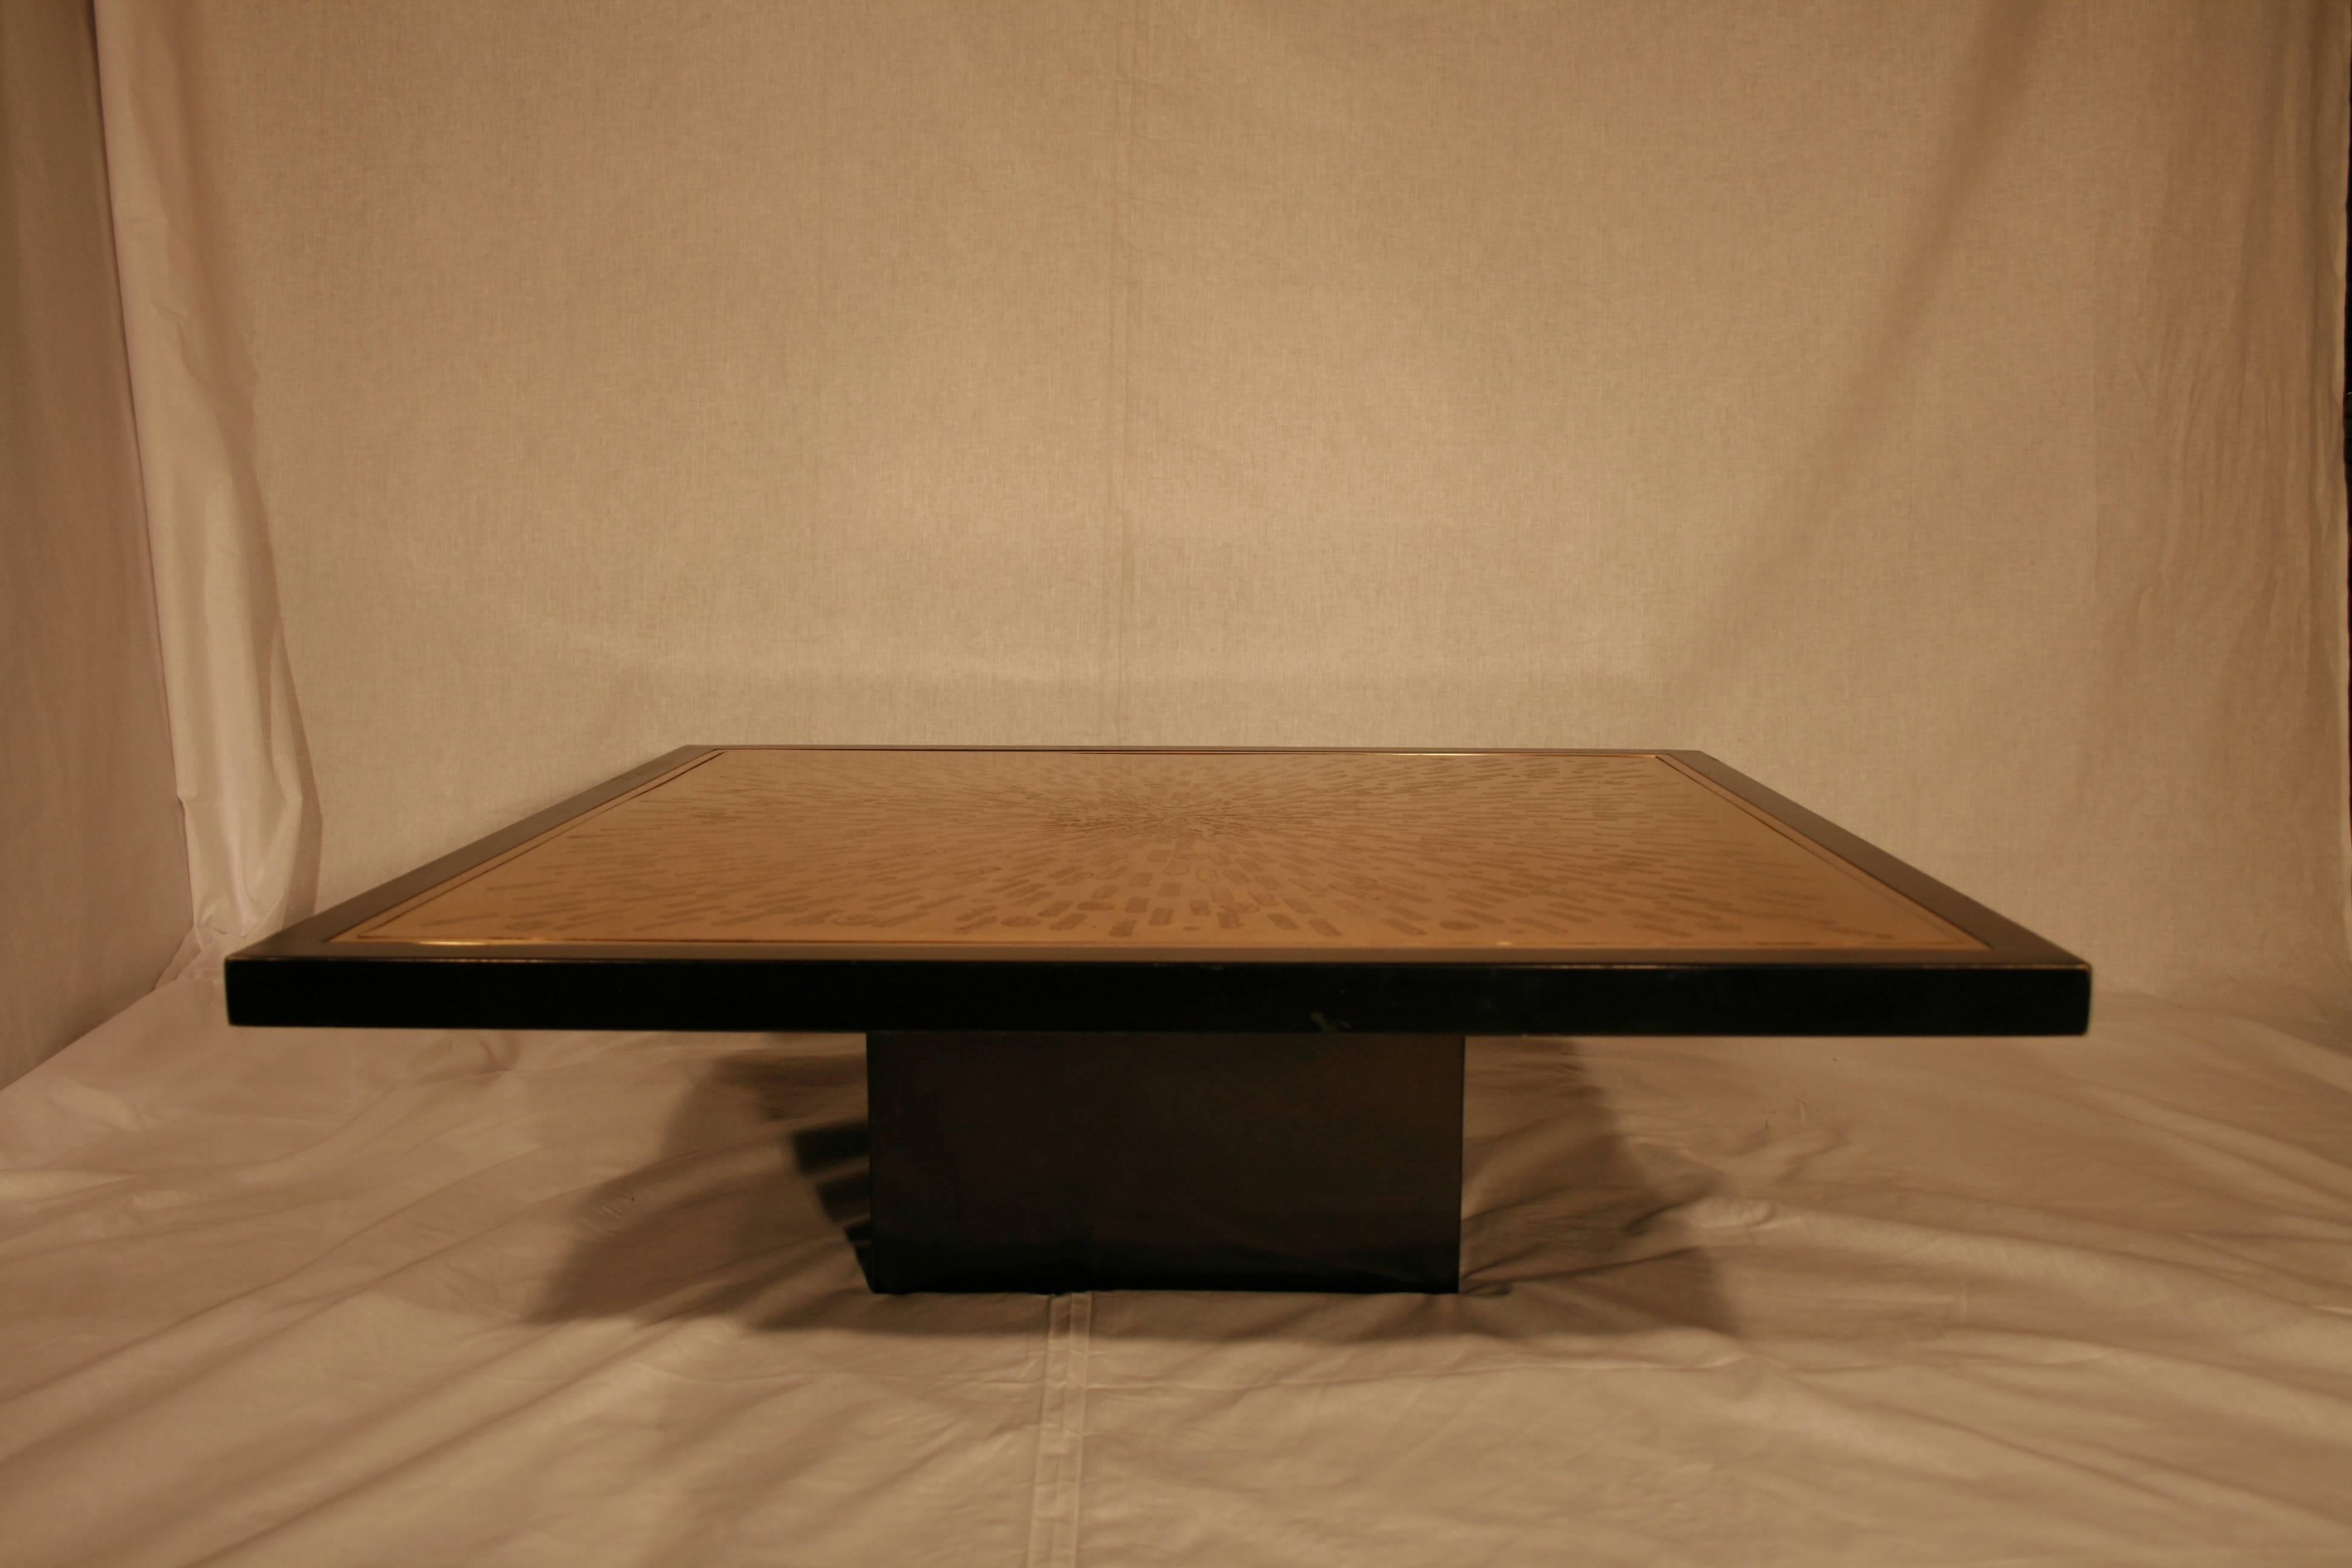 Coffee table by Maud signed 1984, school of lova creation.